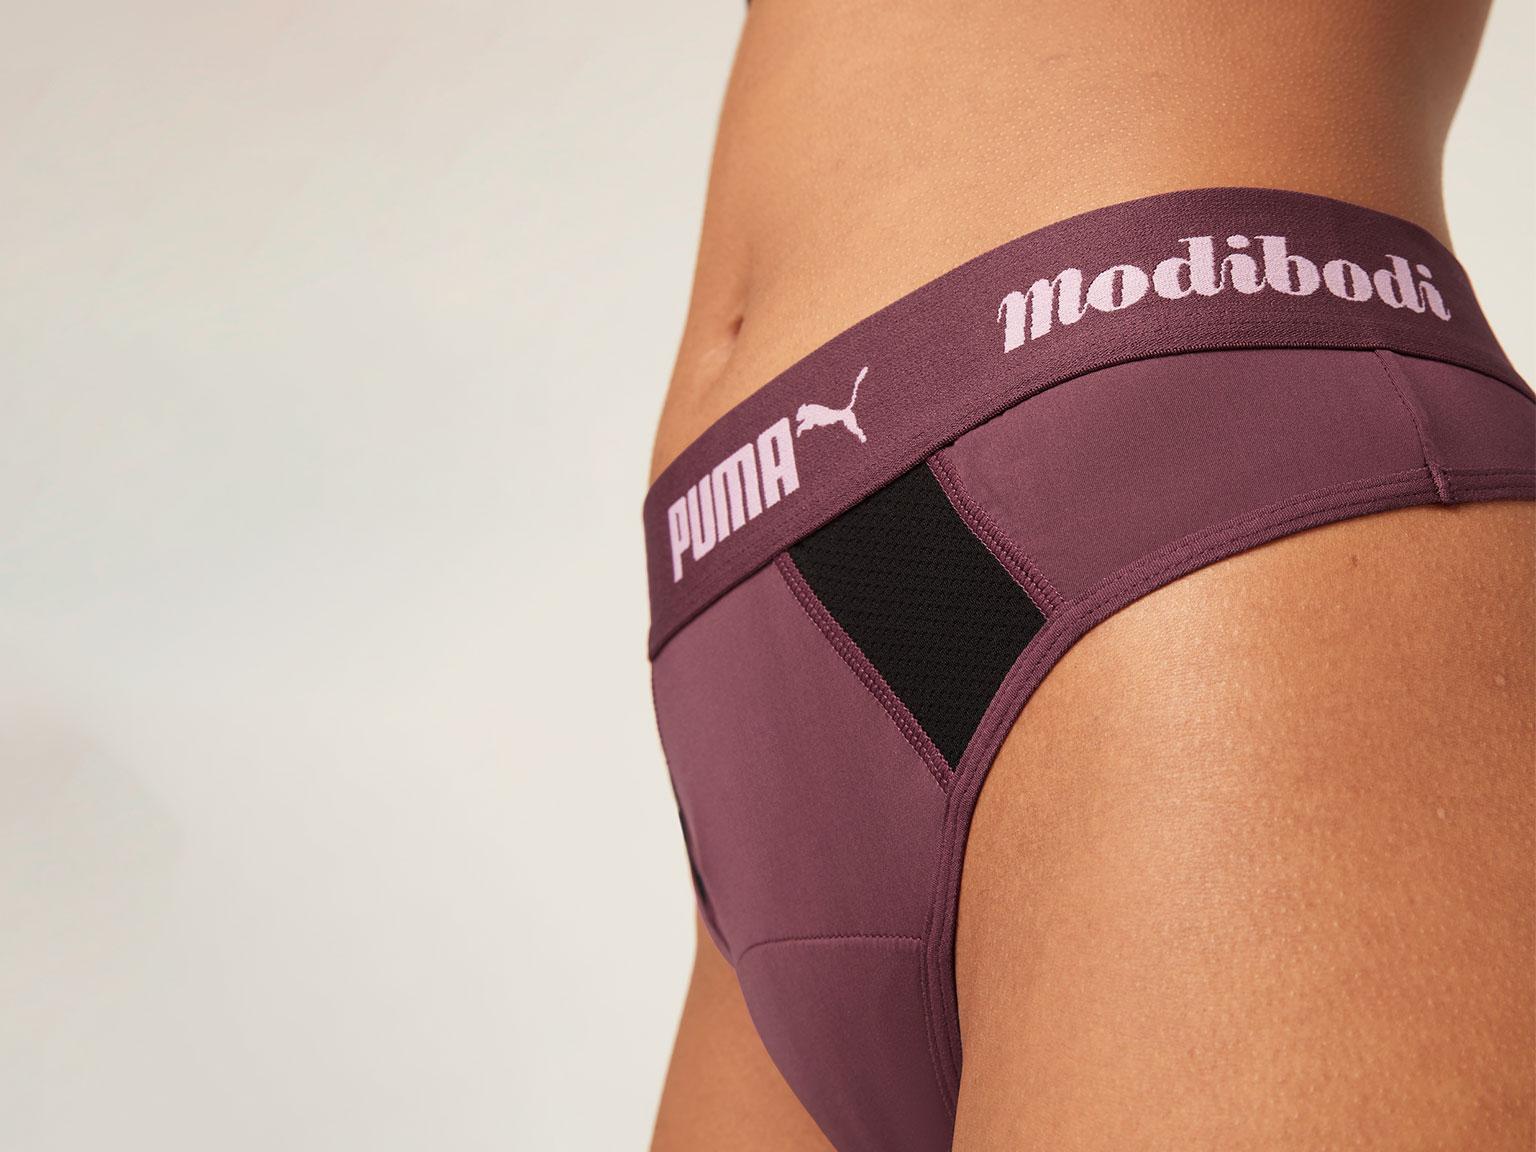 These period pants from Modibodi are helping women protect the planet